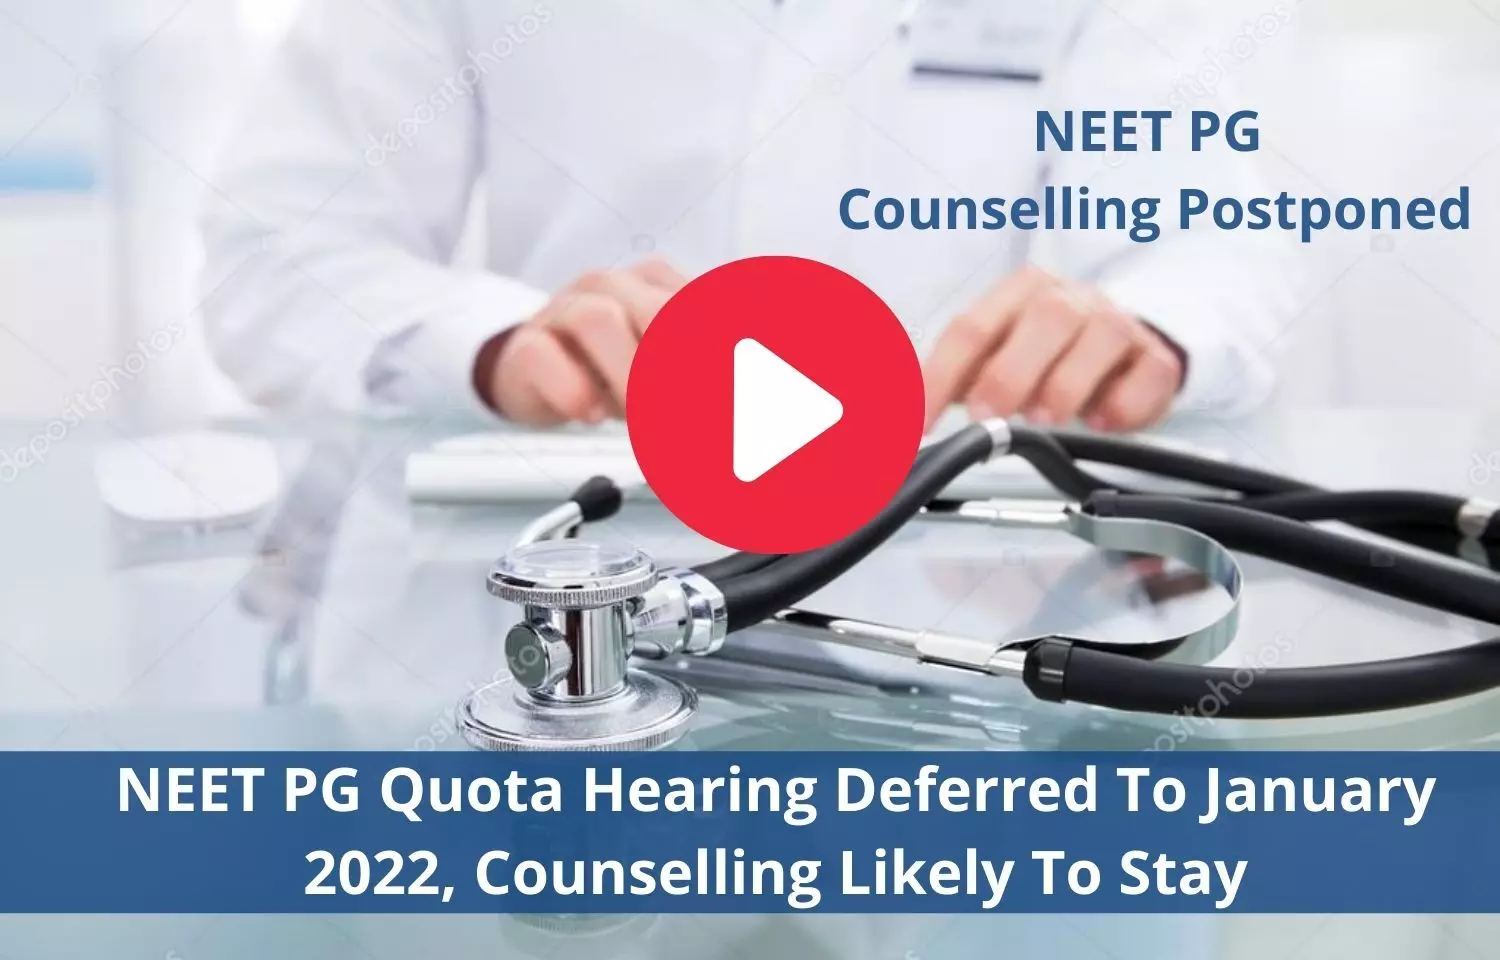 More than a month delay for NEET PG counselling as SC gives hearing date January 2022